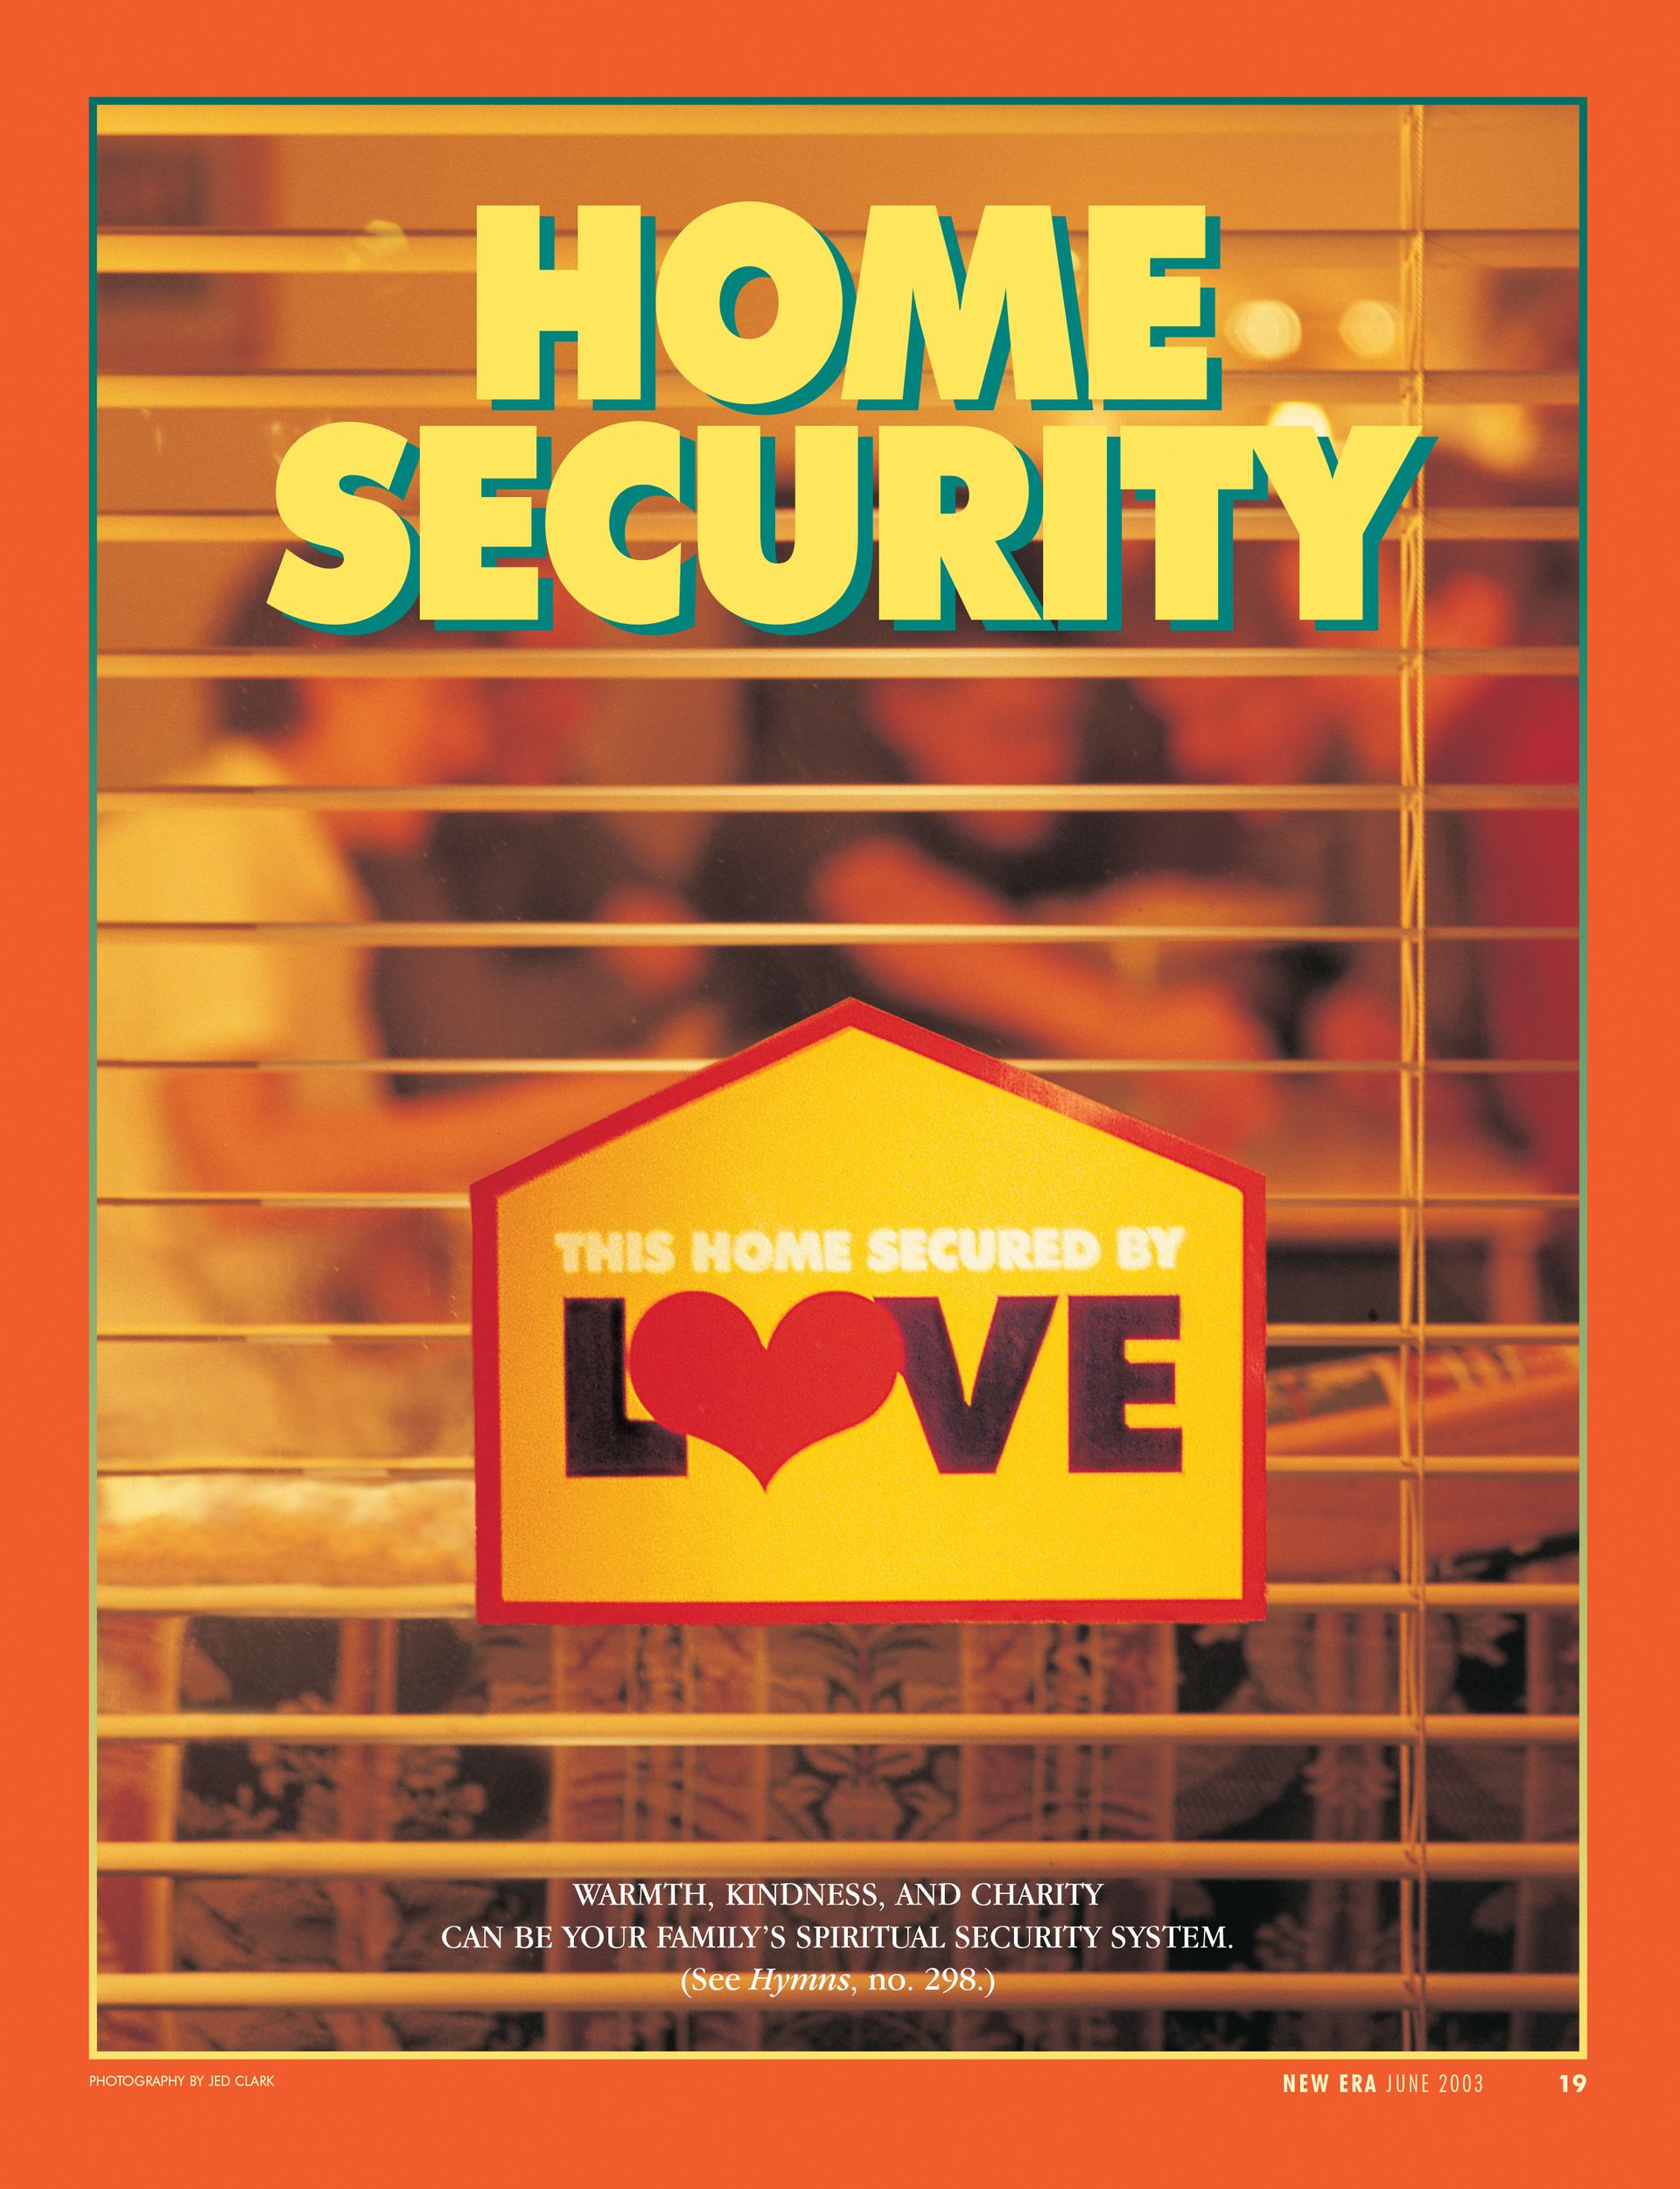 Home Security. Warmth, kindness, and charity can be your family’s spiritual security system. (See Hymns, no. 298.) June 2003 © undefined ipCode 1.